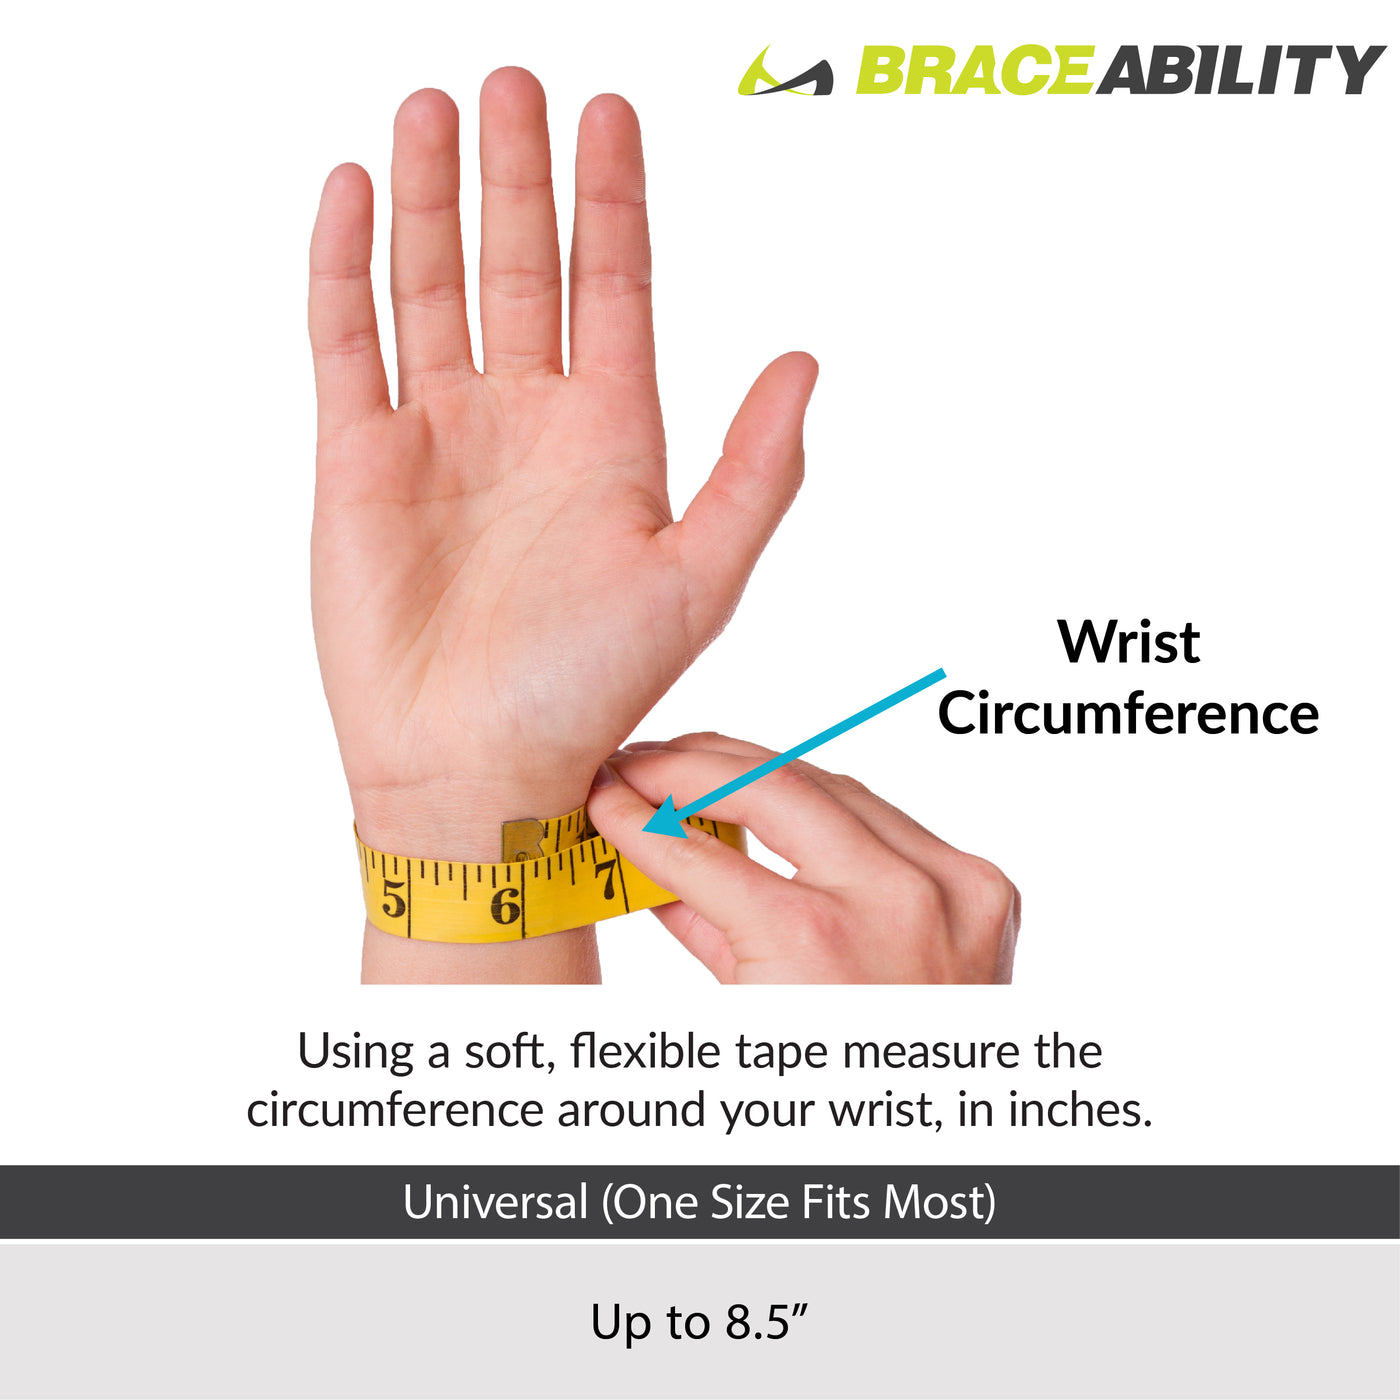 sizing for the limp wrist brace for radial nerve palsy is one size fits most